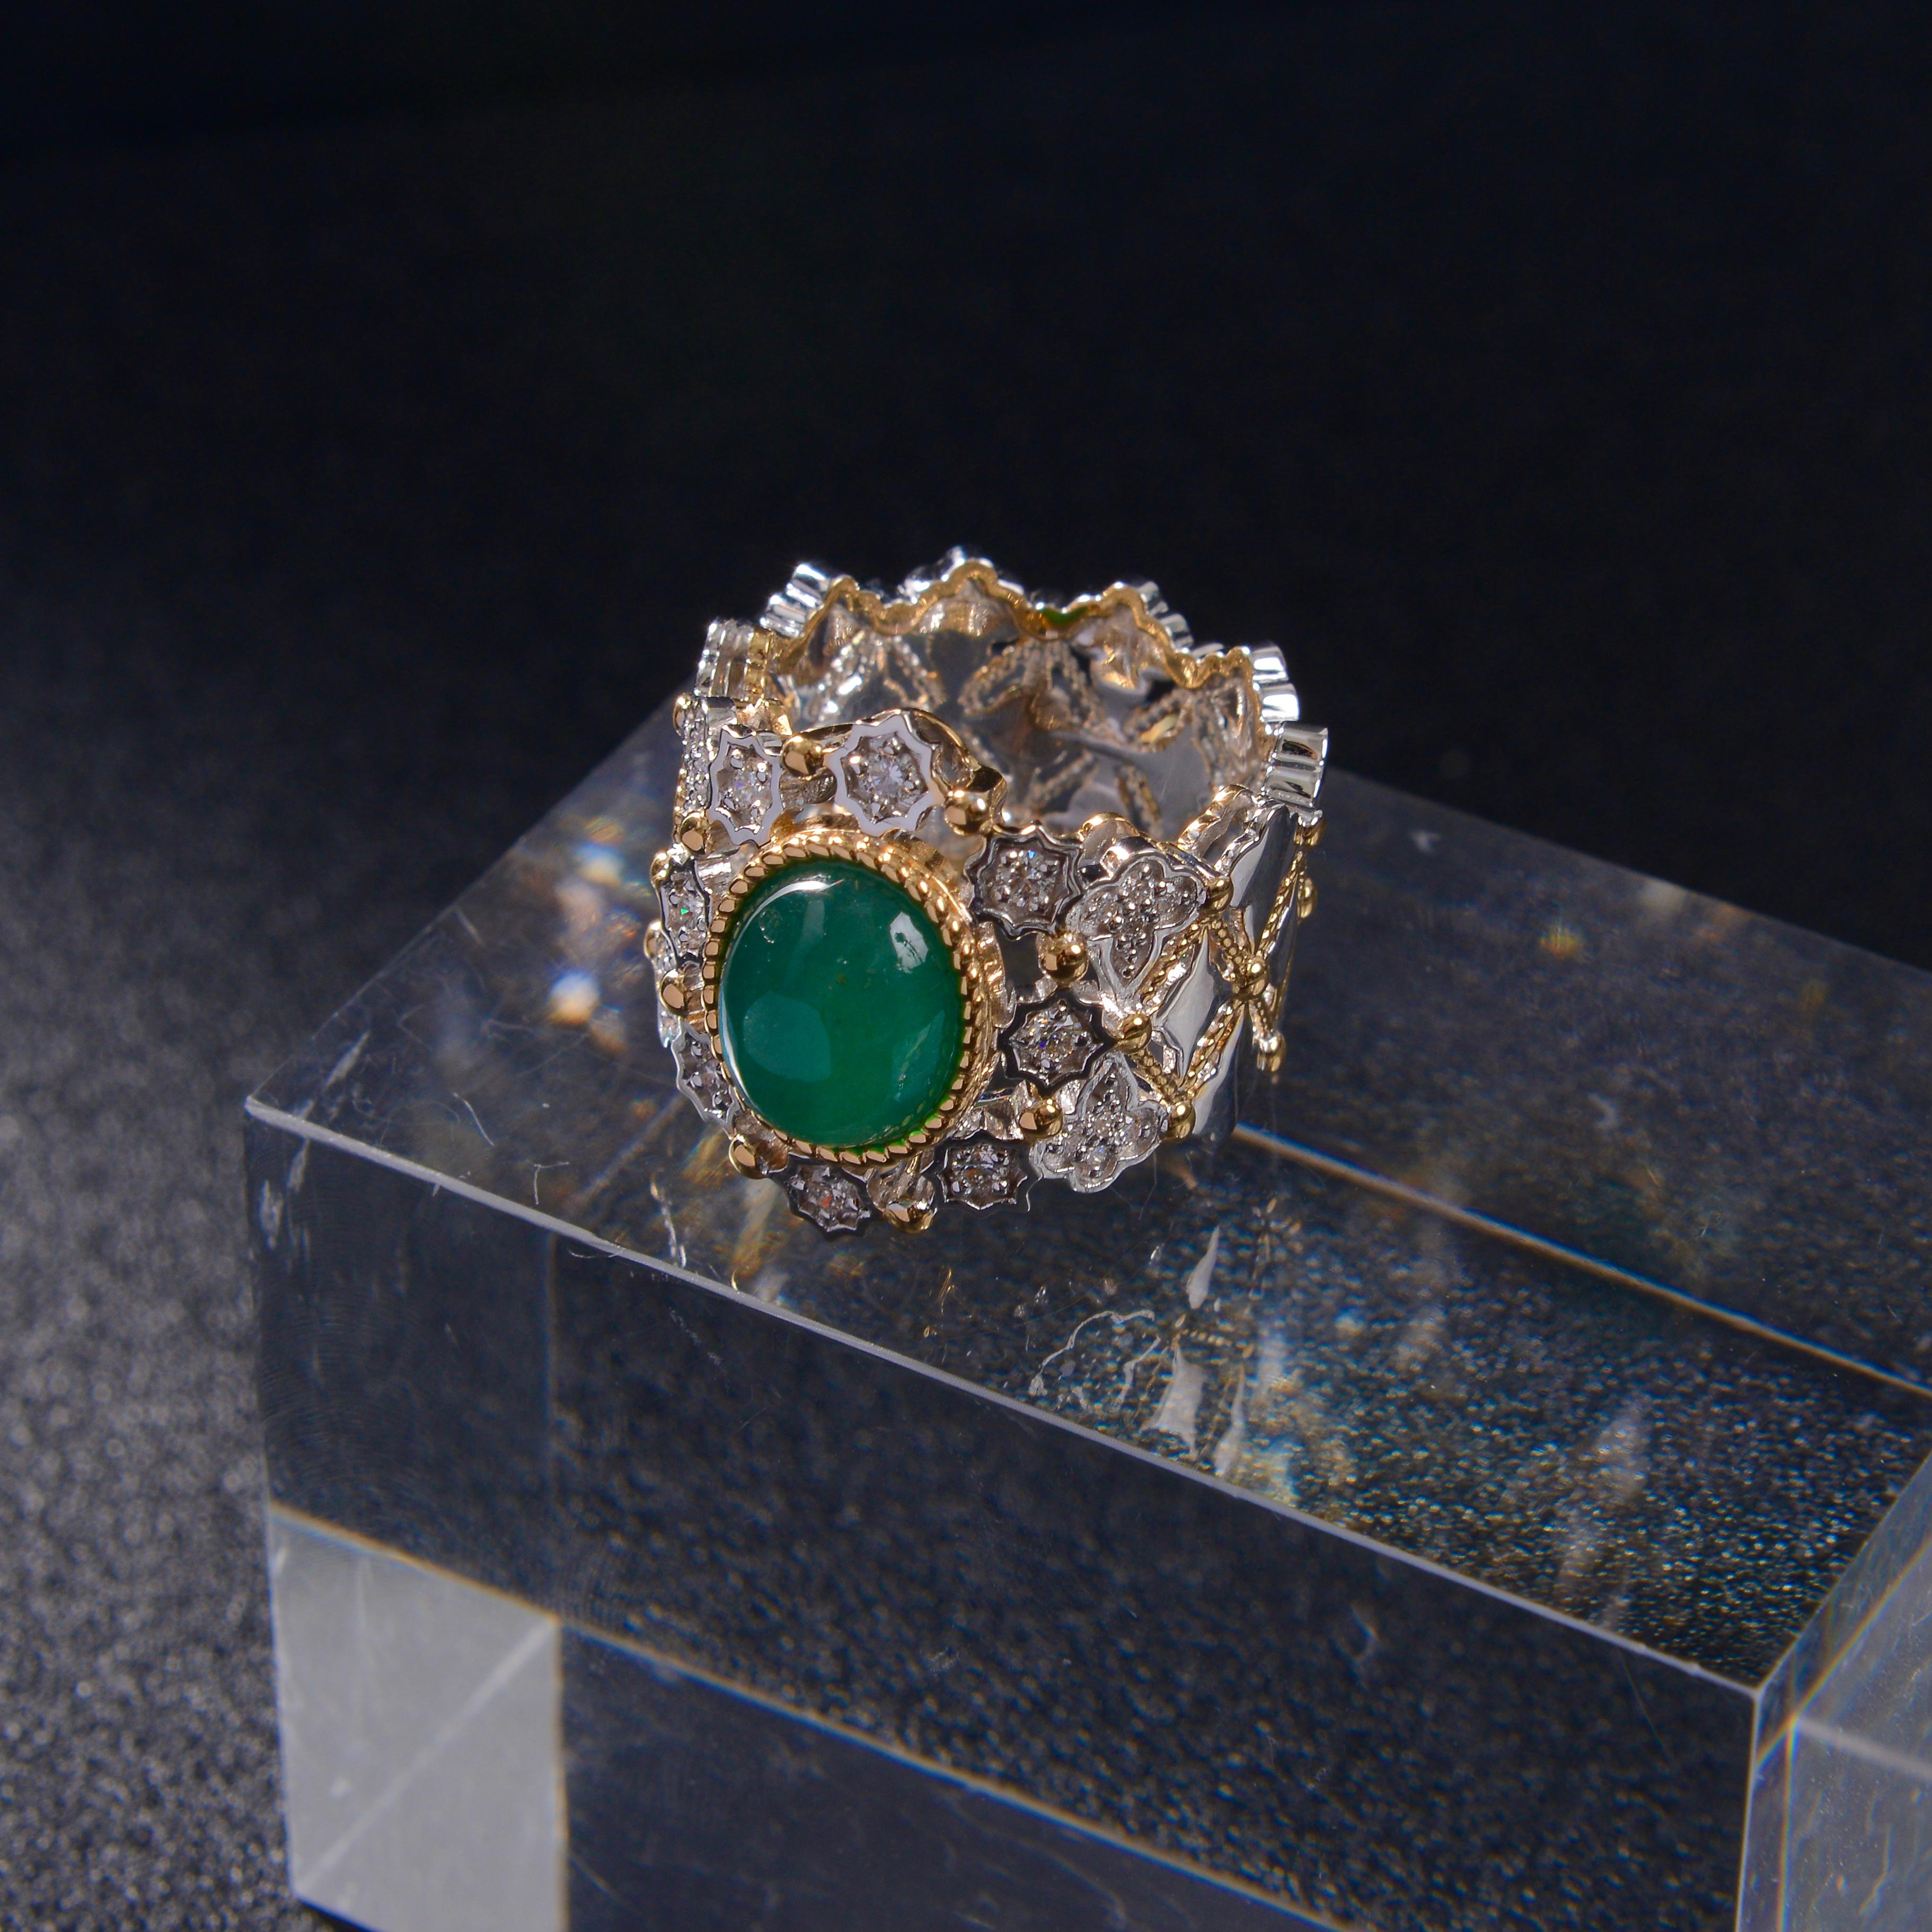 Contemporary 3.95 Ct Vivid Green Emerald and Diamond Ring in 18k Yellow and White Gold